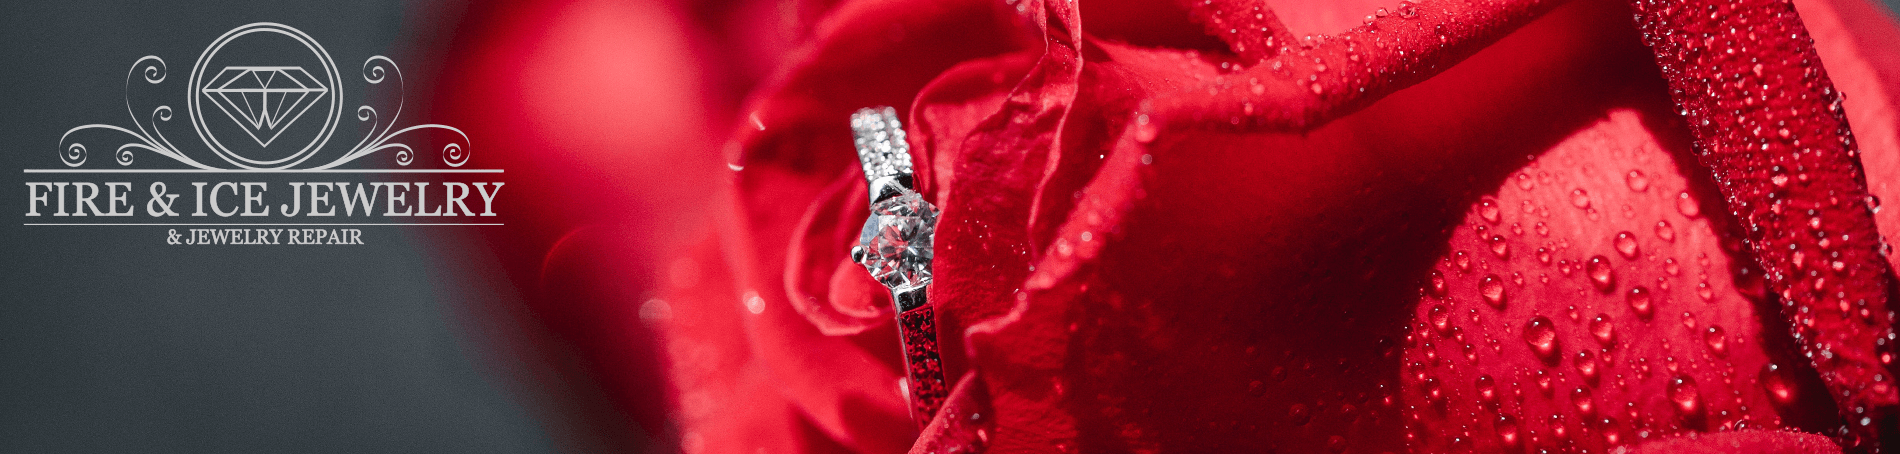 Image of a diamond ring nestled int he petals of a red rose, with the logo of Rire and Ice on the left